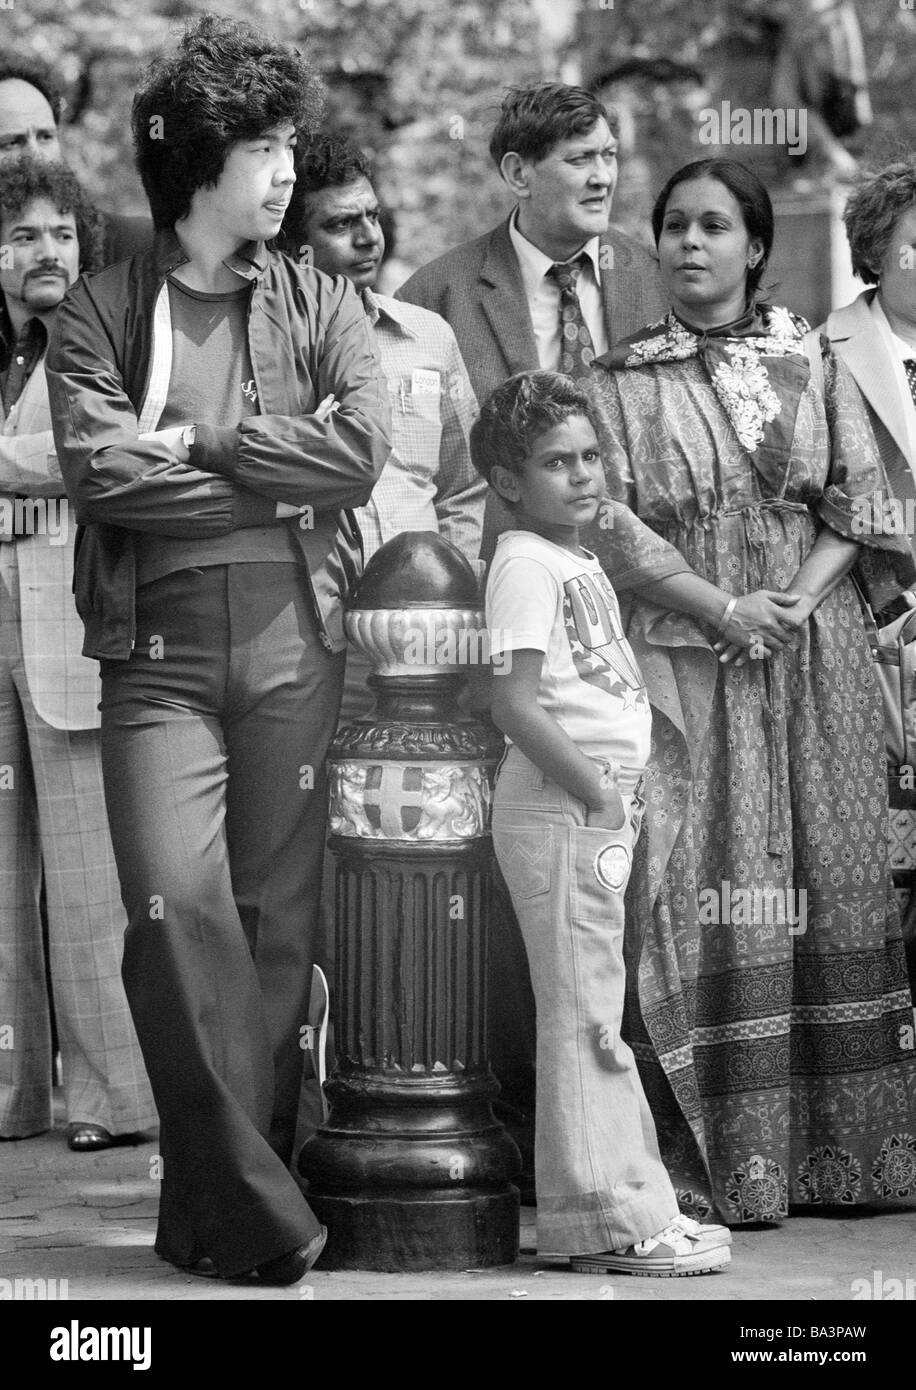 Seventies, black and white photo, people stand on a square and watch an event, different nationalities, multicultural, Chinese, aged 20 to 25 years, Indian, aged 30 to 40 years, Indian woman, aged 25 to 30 years, Indian boy, aged 8 to 12 years, Englishman, aged 45 to 55 years, Great Britain, England, London Stock Photo